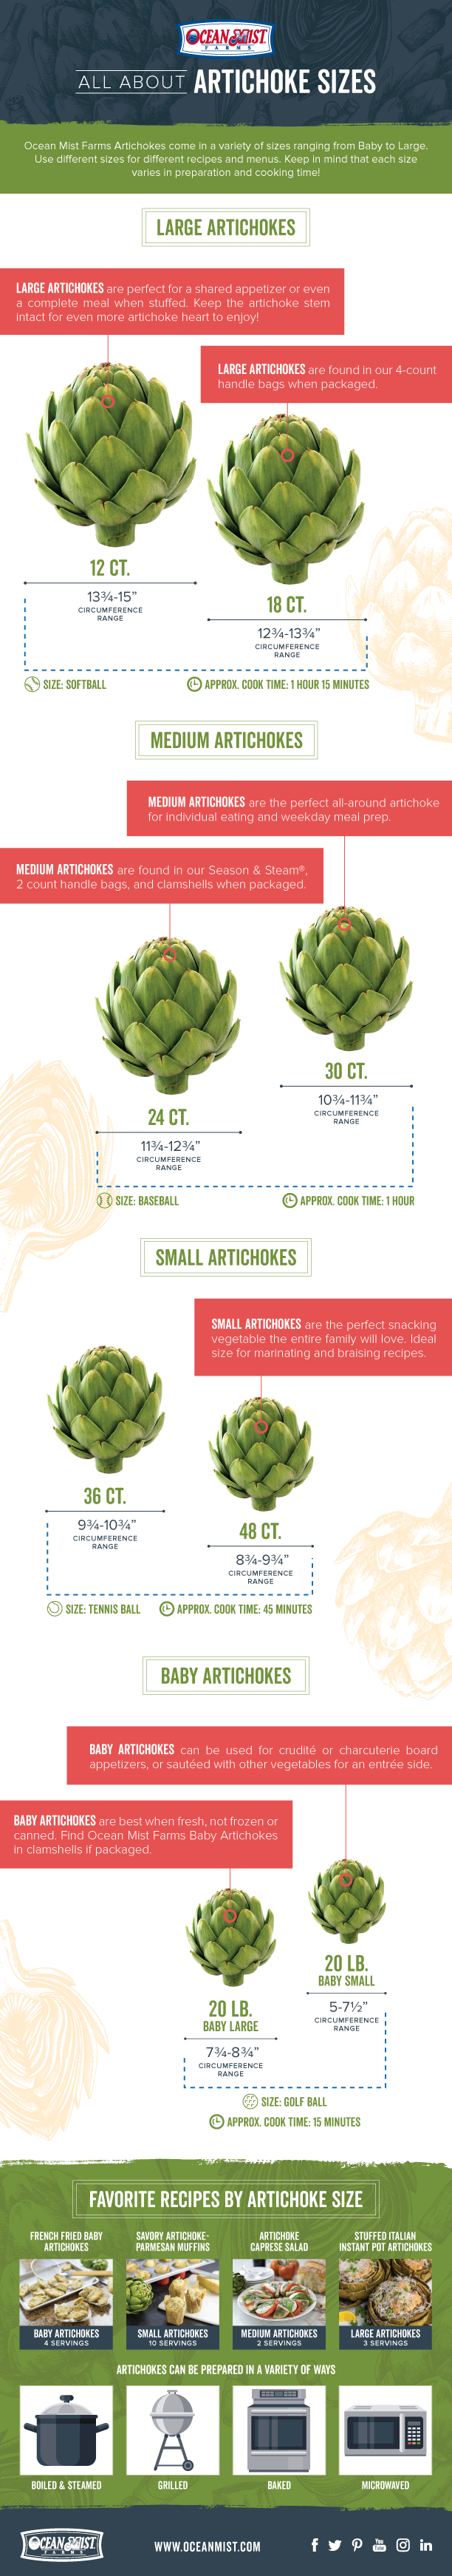 OM_All-About-Artichokes_Infographic